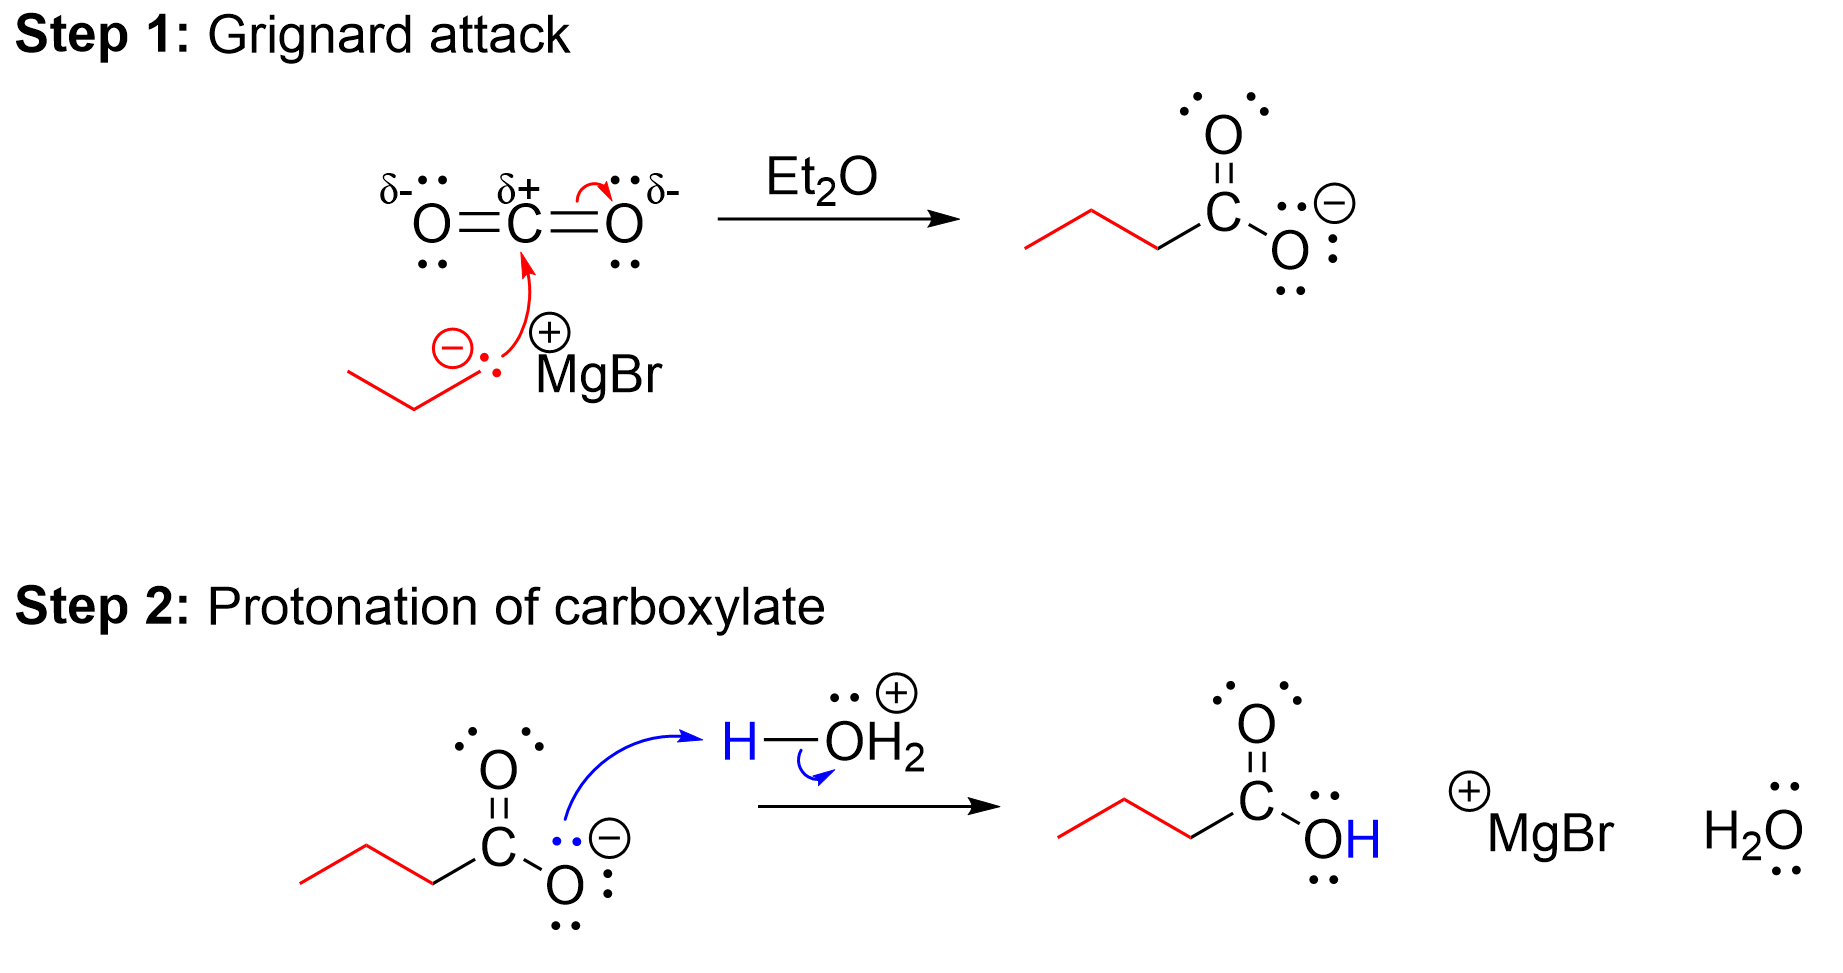 A two-step Grignard reaction where in the first step, a propyl magnesium bromide (propyl Grignard) attacks the electrophilic carbon in CO2, thus pushing the electron density of one of the double bonds to the Oxygen, forming a butyl carboxylate. In the second step, the carboxylate abstracts a H from H3O+ (an acid), generating a neutral carboxylic acid and water.